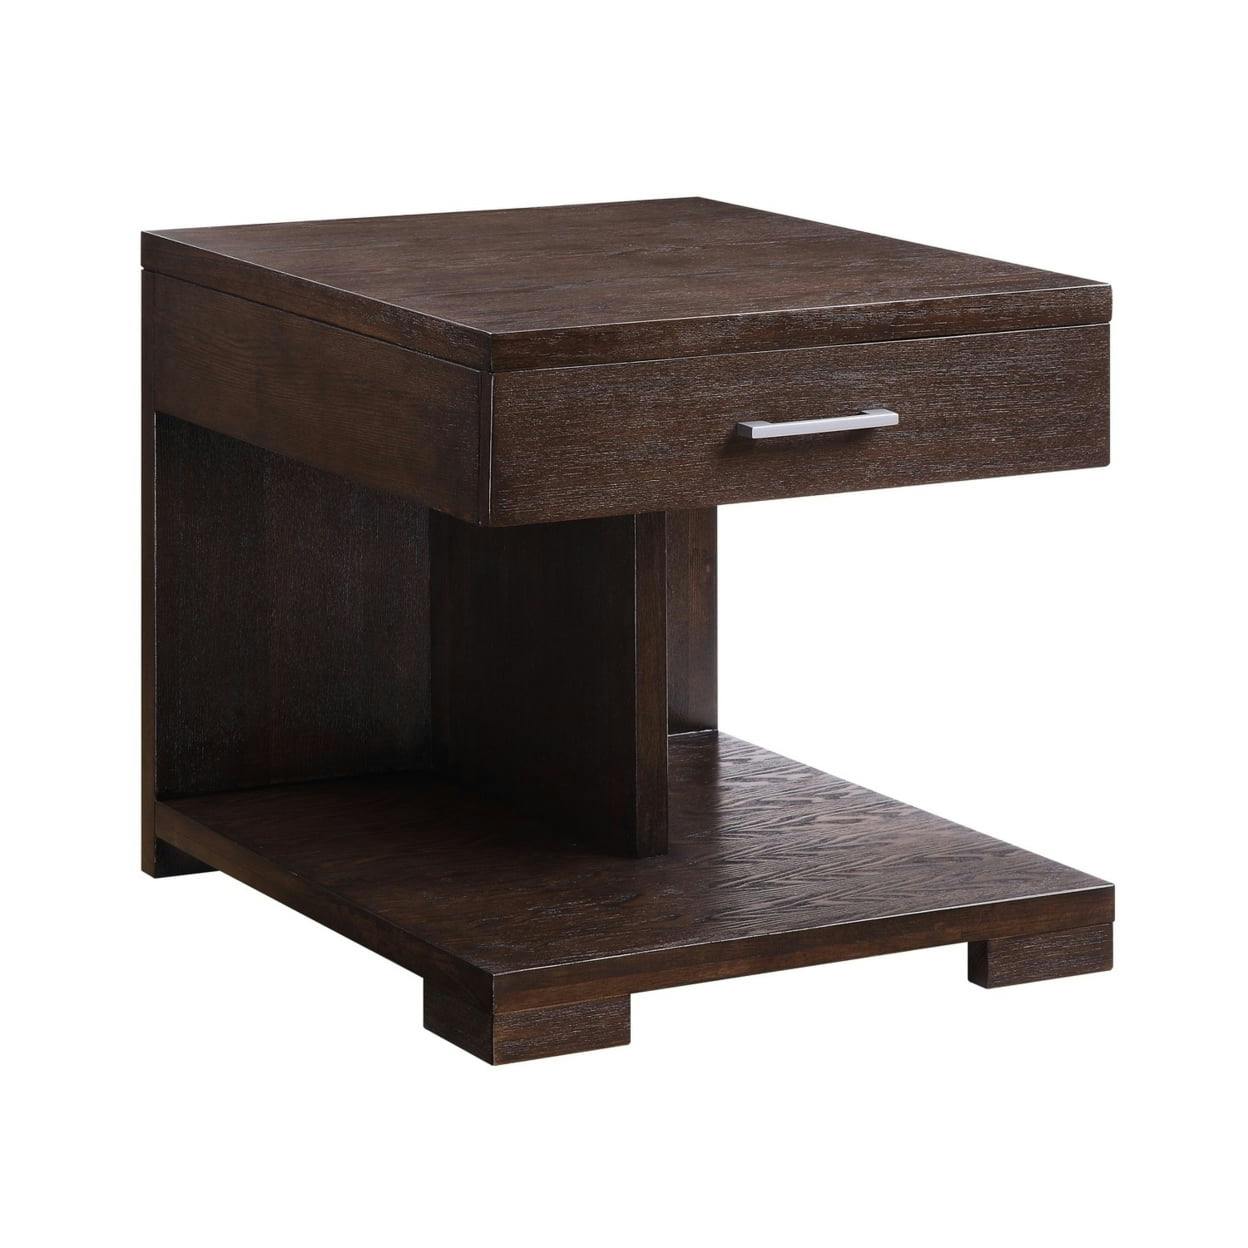 Contemporary Brown Wood End Table with Storage Drawer and Shelf